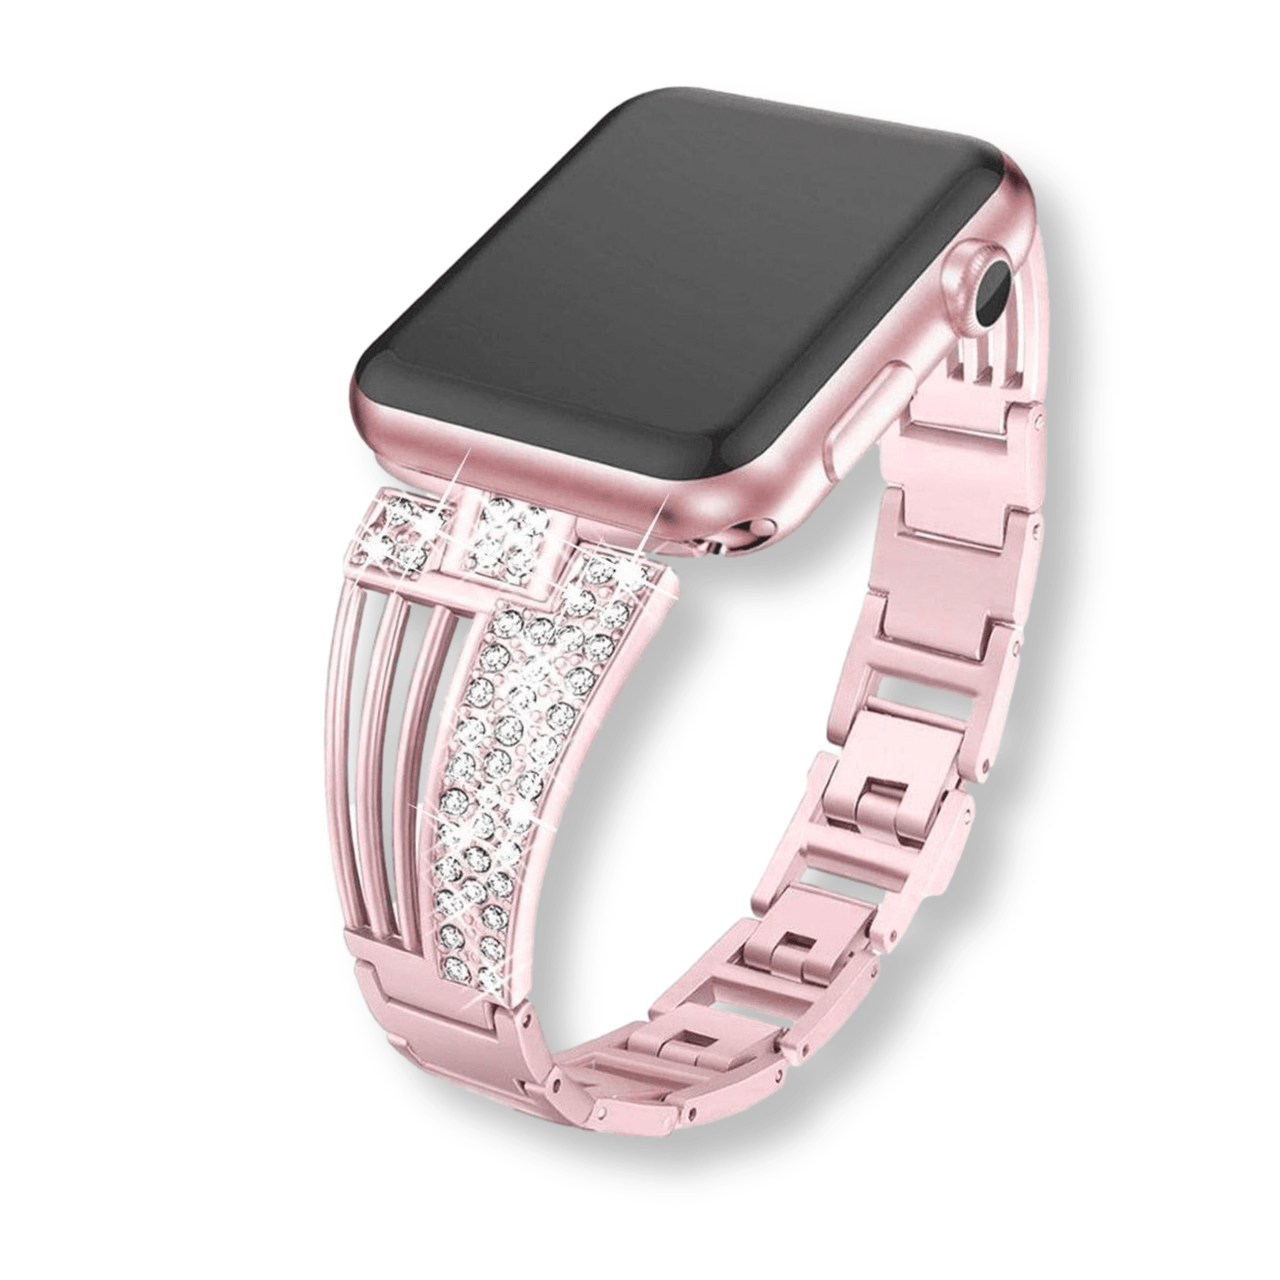 Crystal Diamond Strap For Apple Watch - watchband.direct